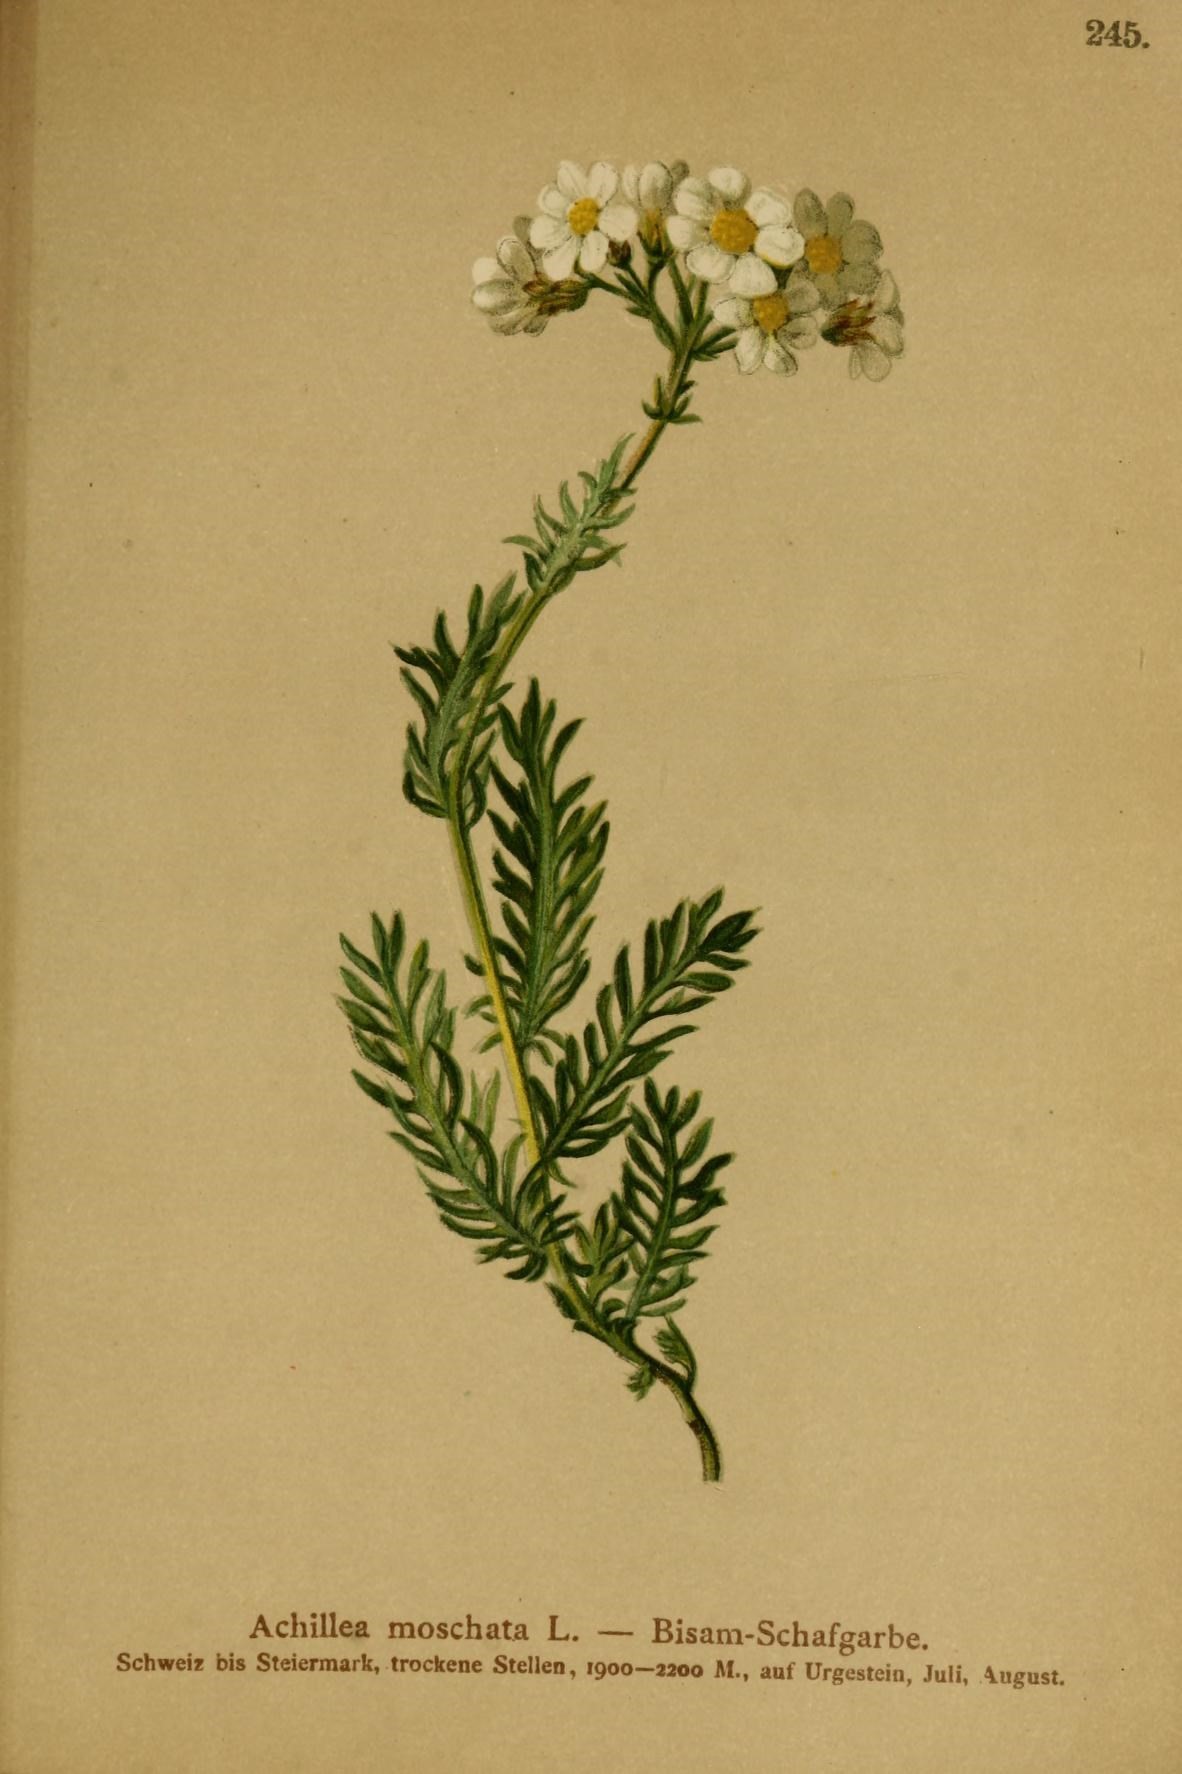 the drawing depicts a plant with flowers and leaves